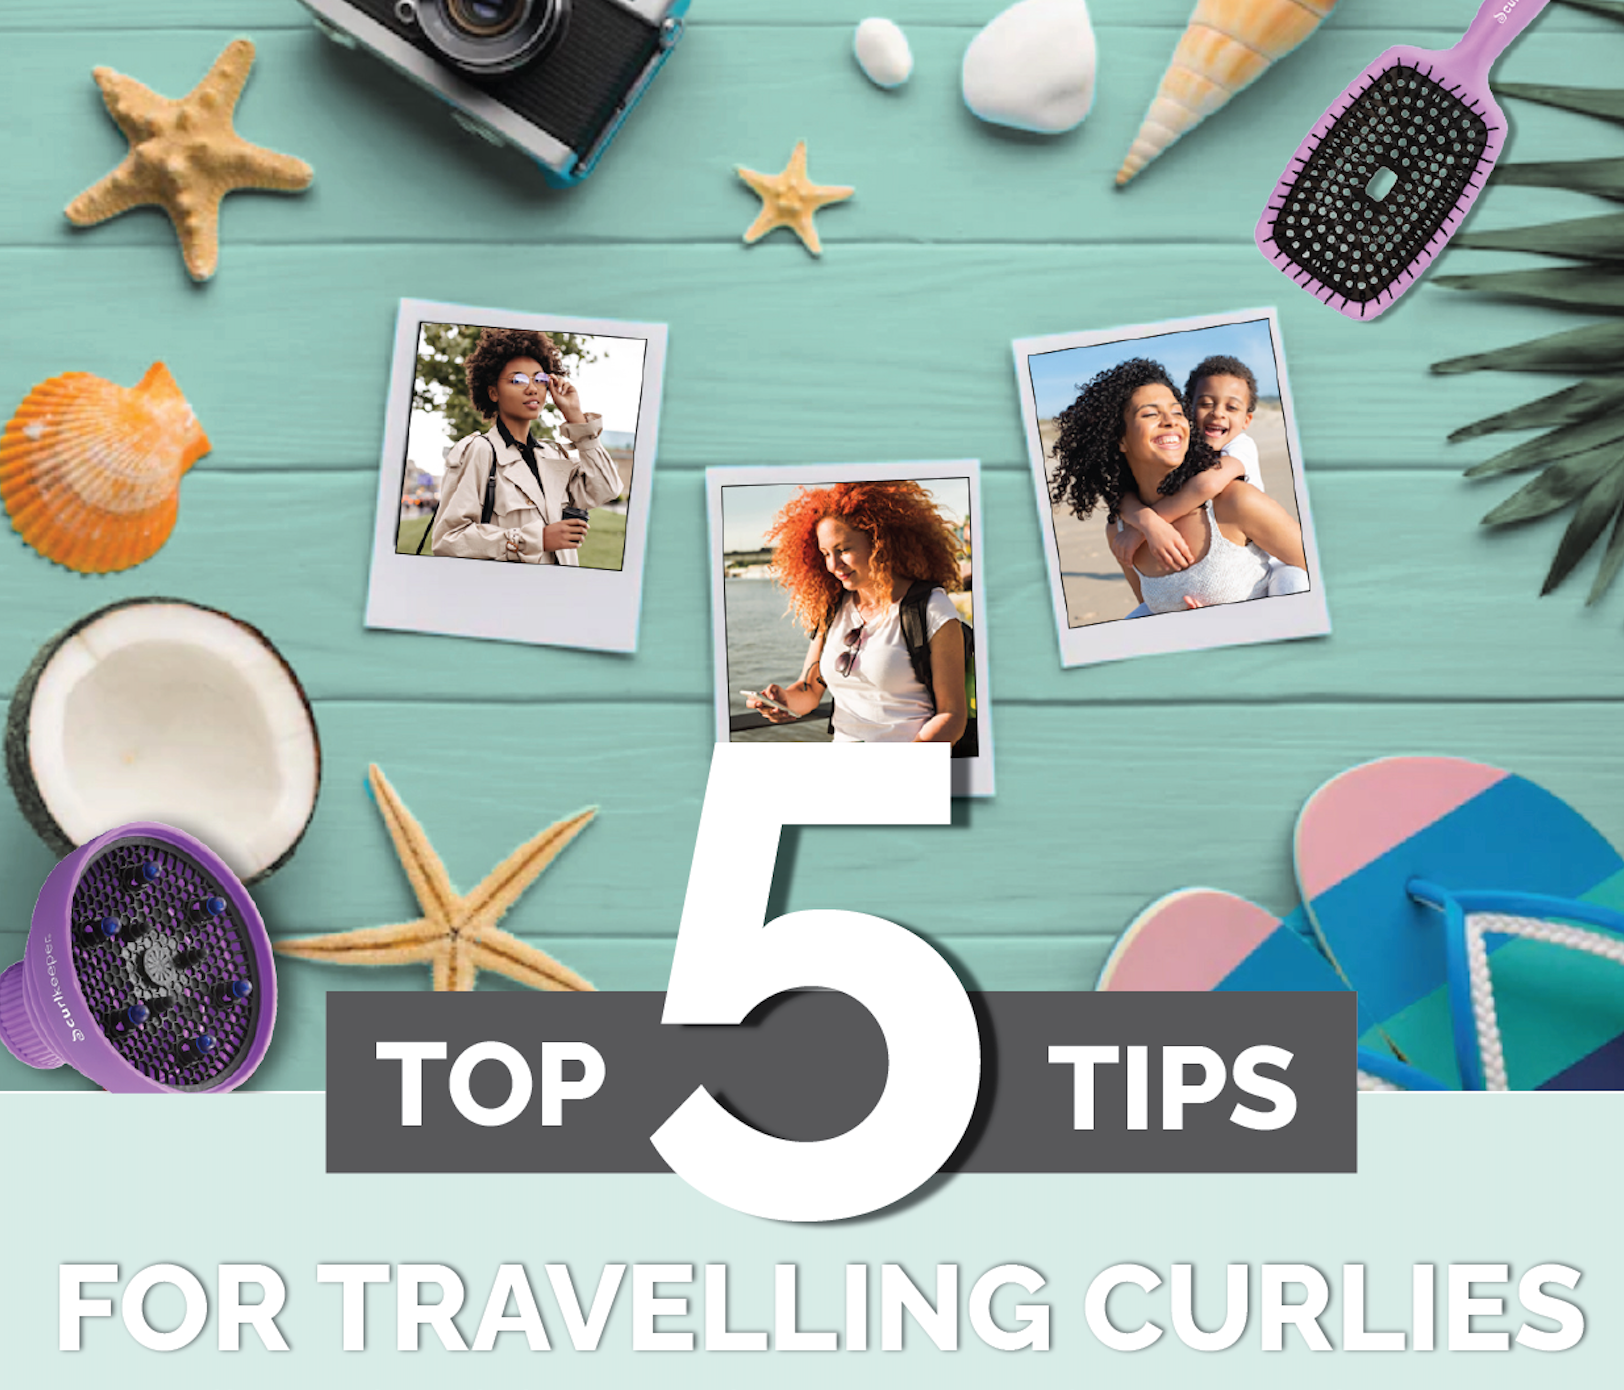 Top 5 Tips For Travelling Curlies!